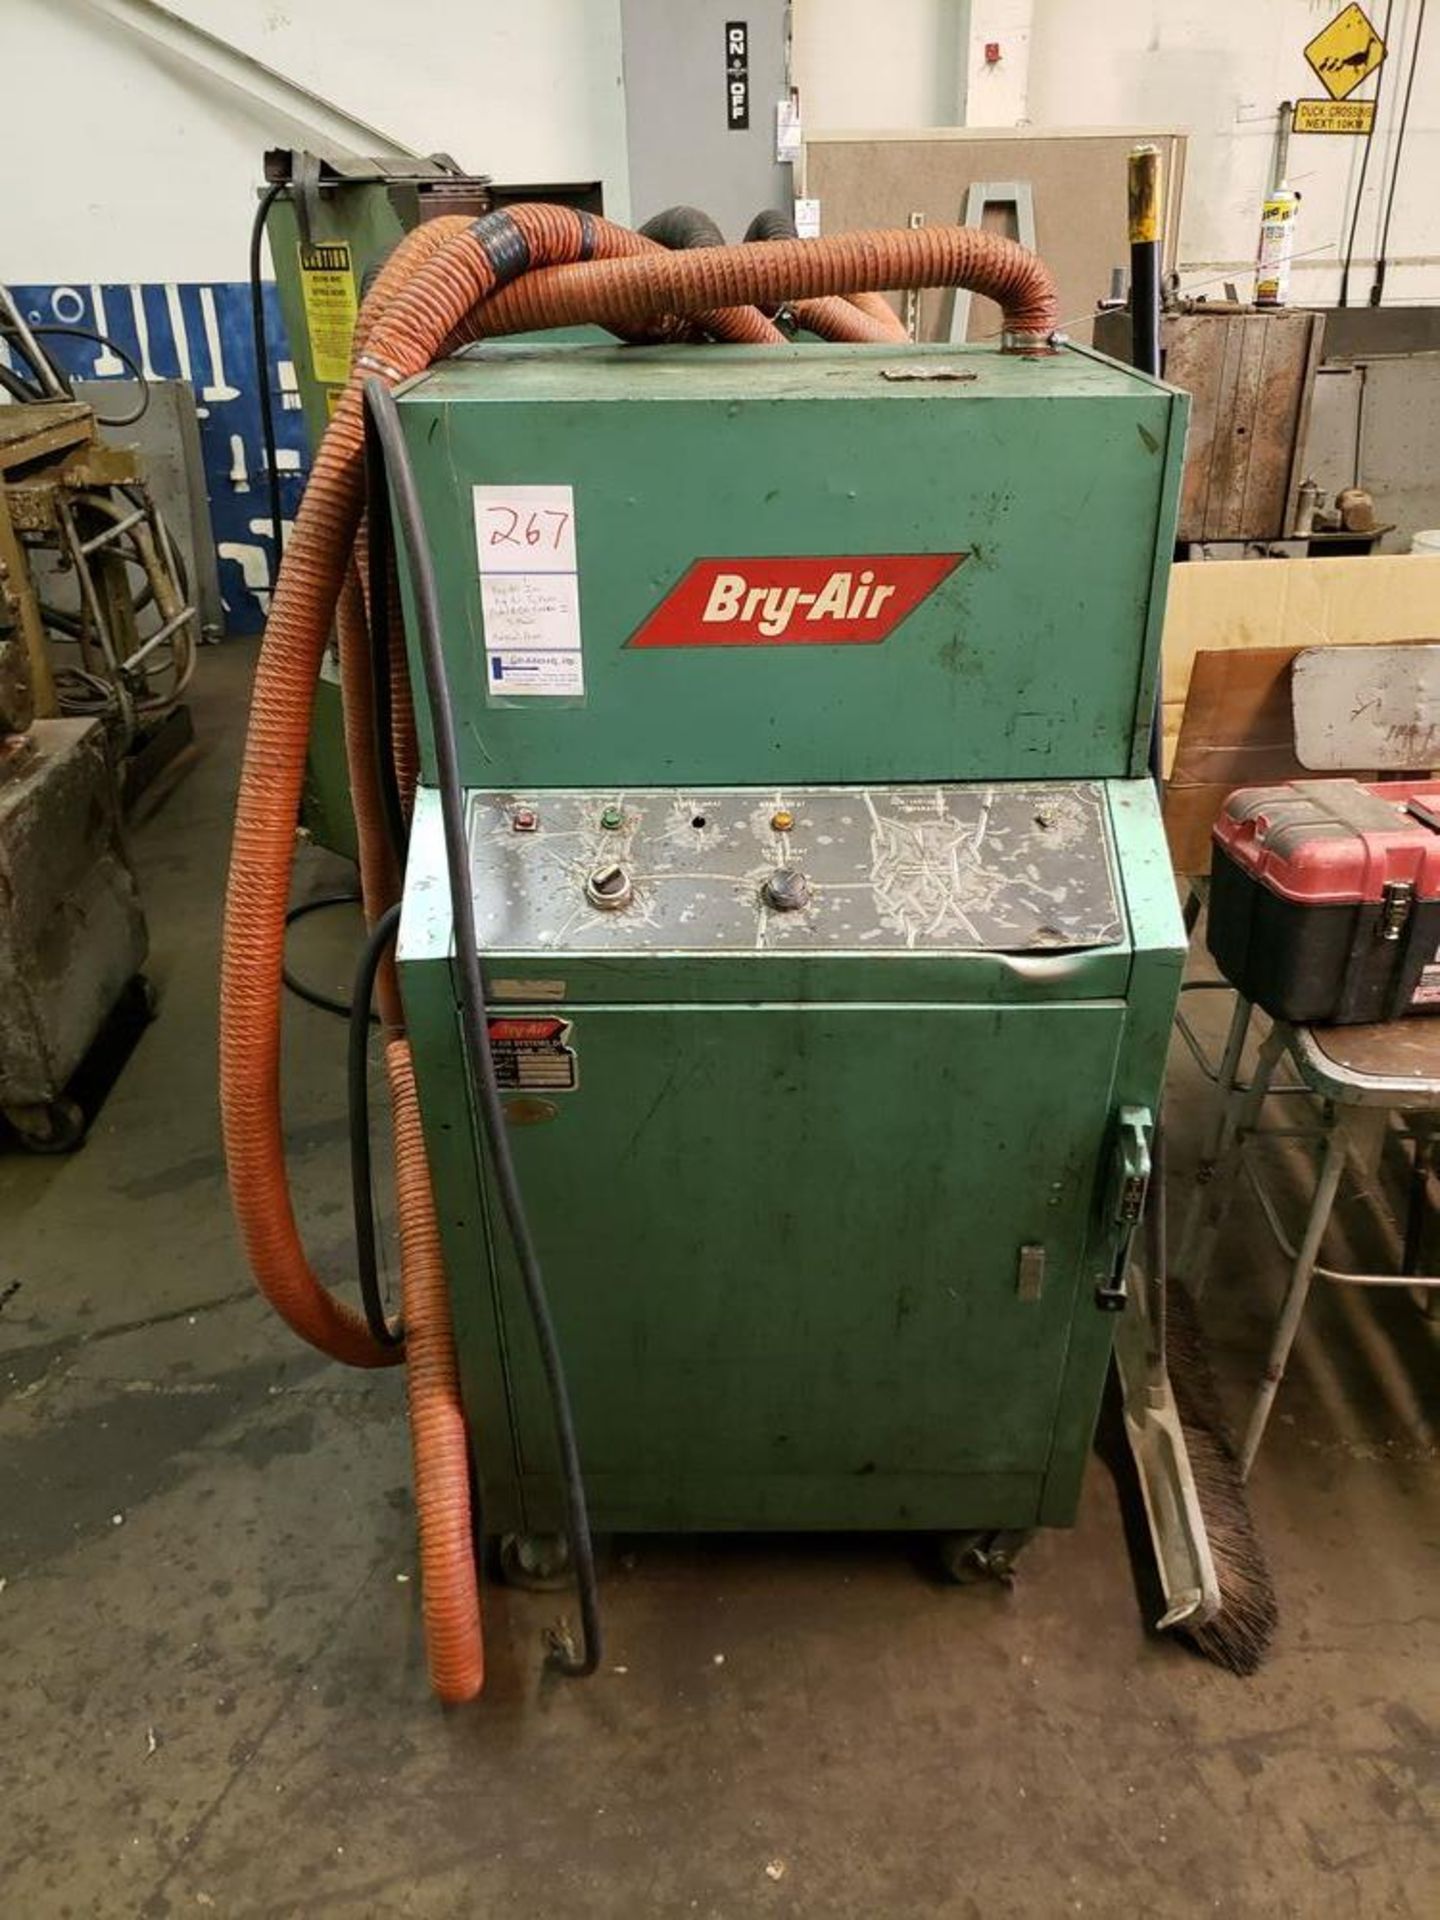 BRY AIR MATERIAL DRYER MODEL DH-5 MARK II - 3 PHASE